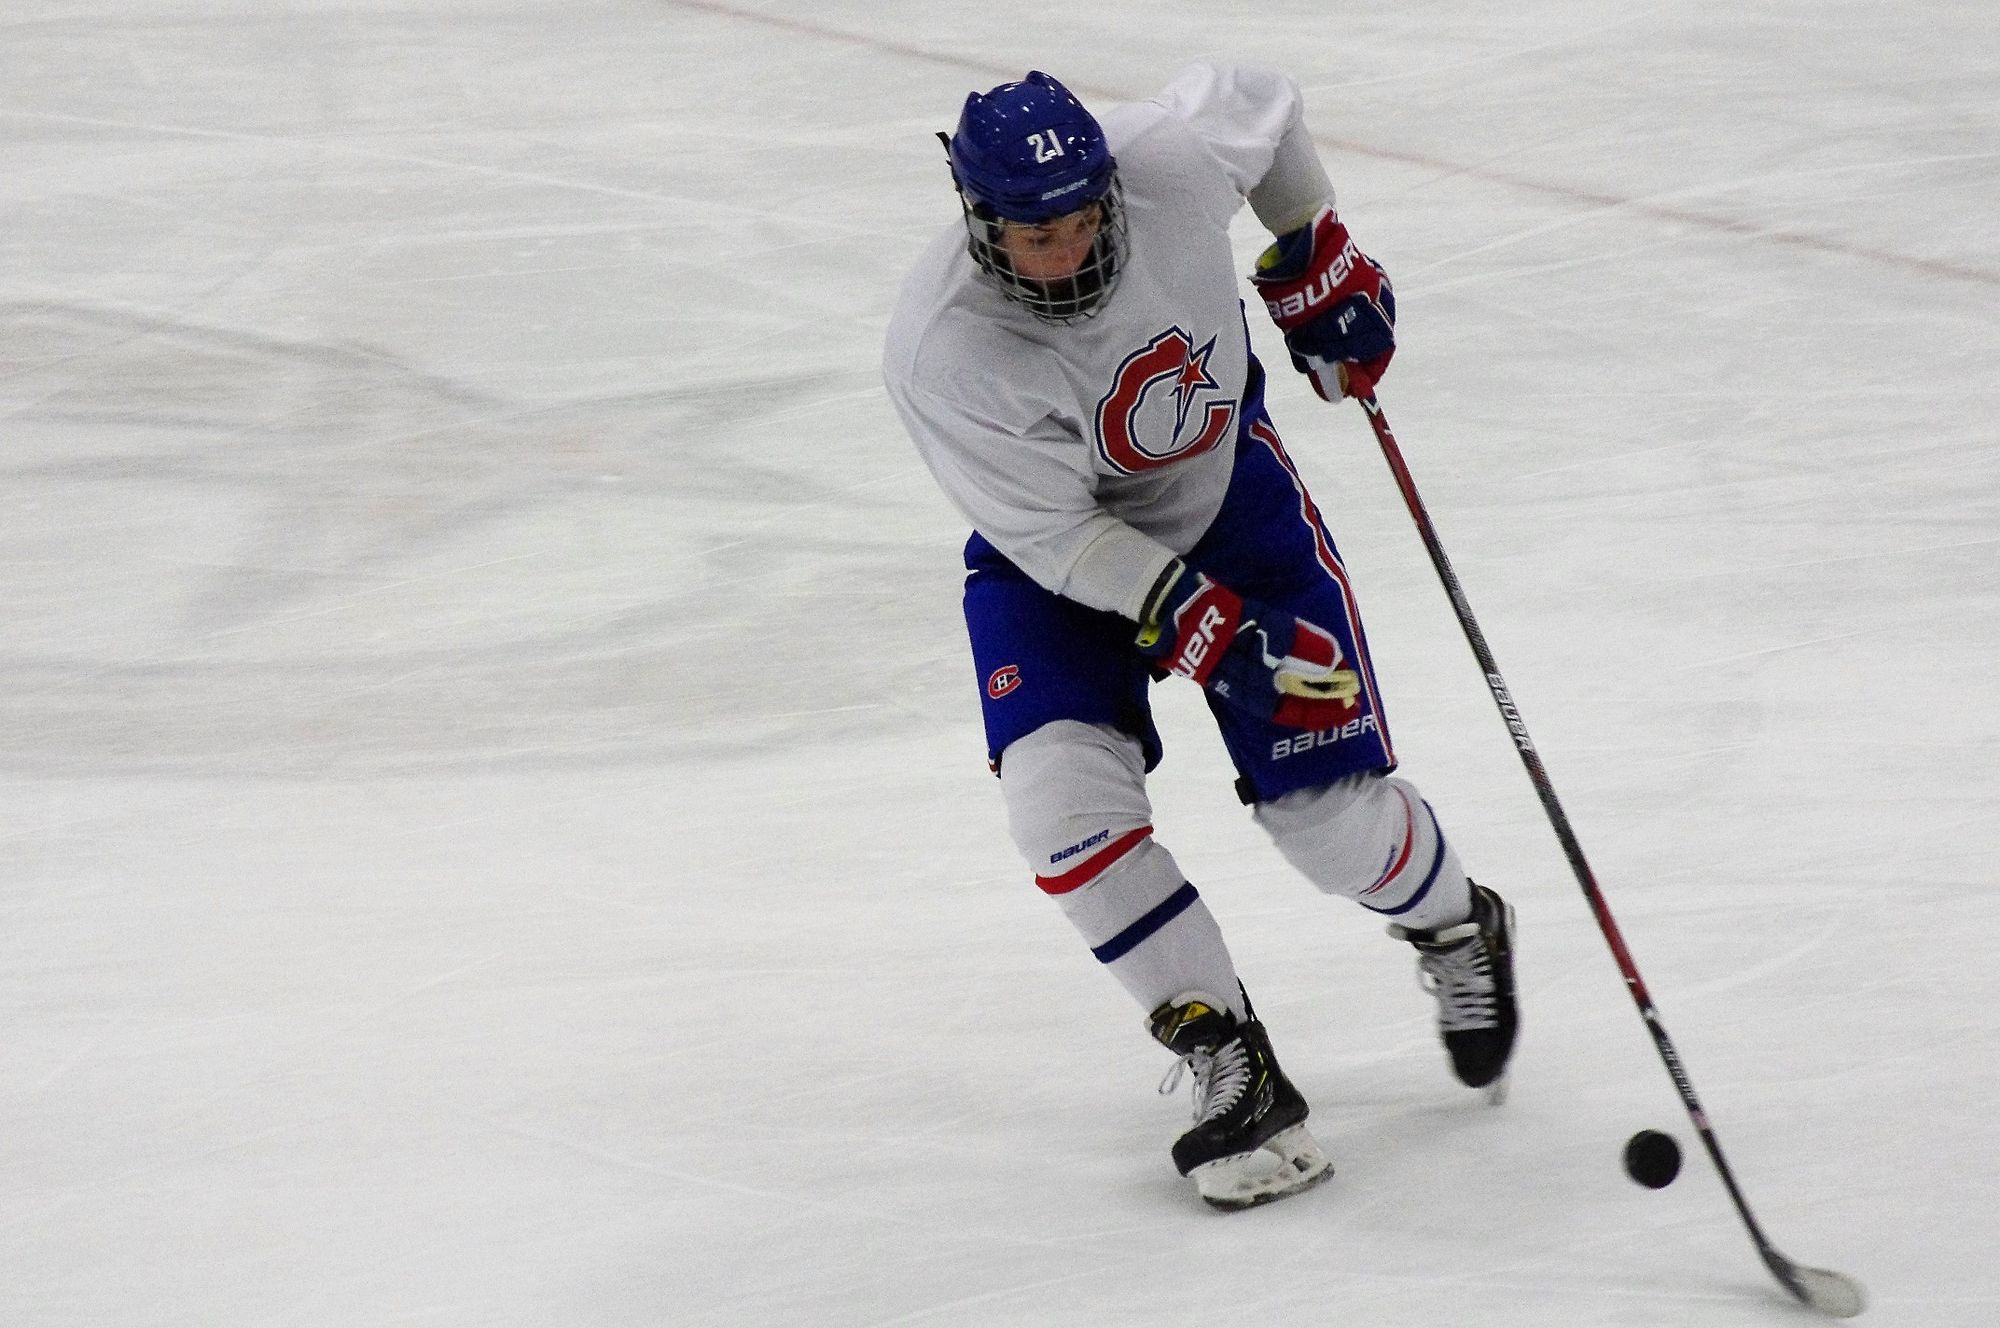 #knight2mtl: Hilary Knight Joins Les Canadiennes